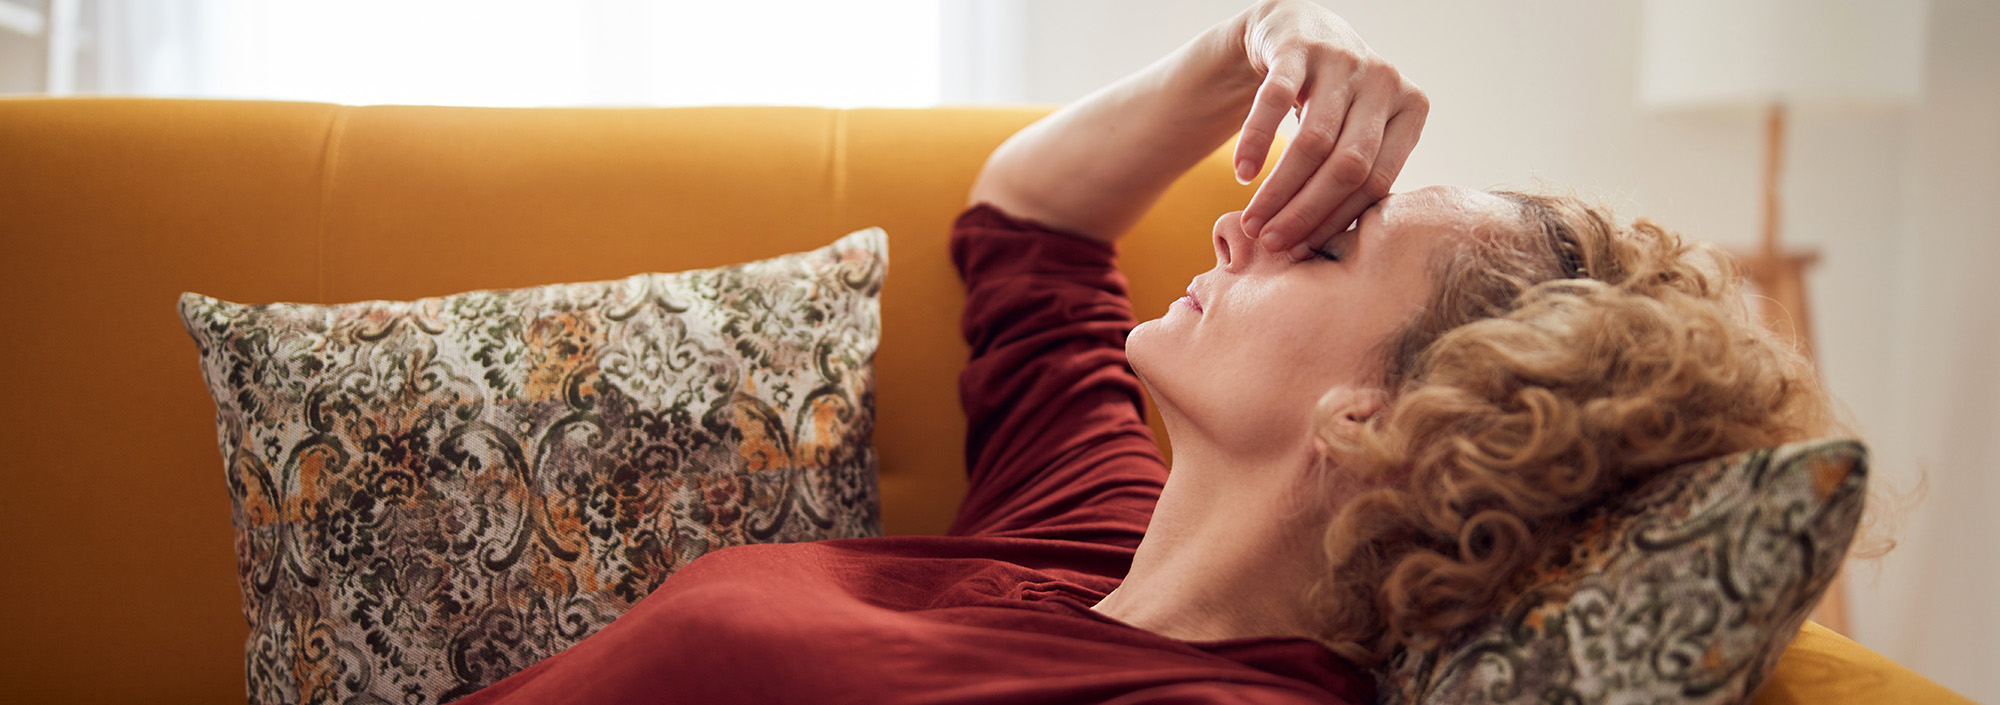 Get Rid of Those Tension Headaches for Good